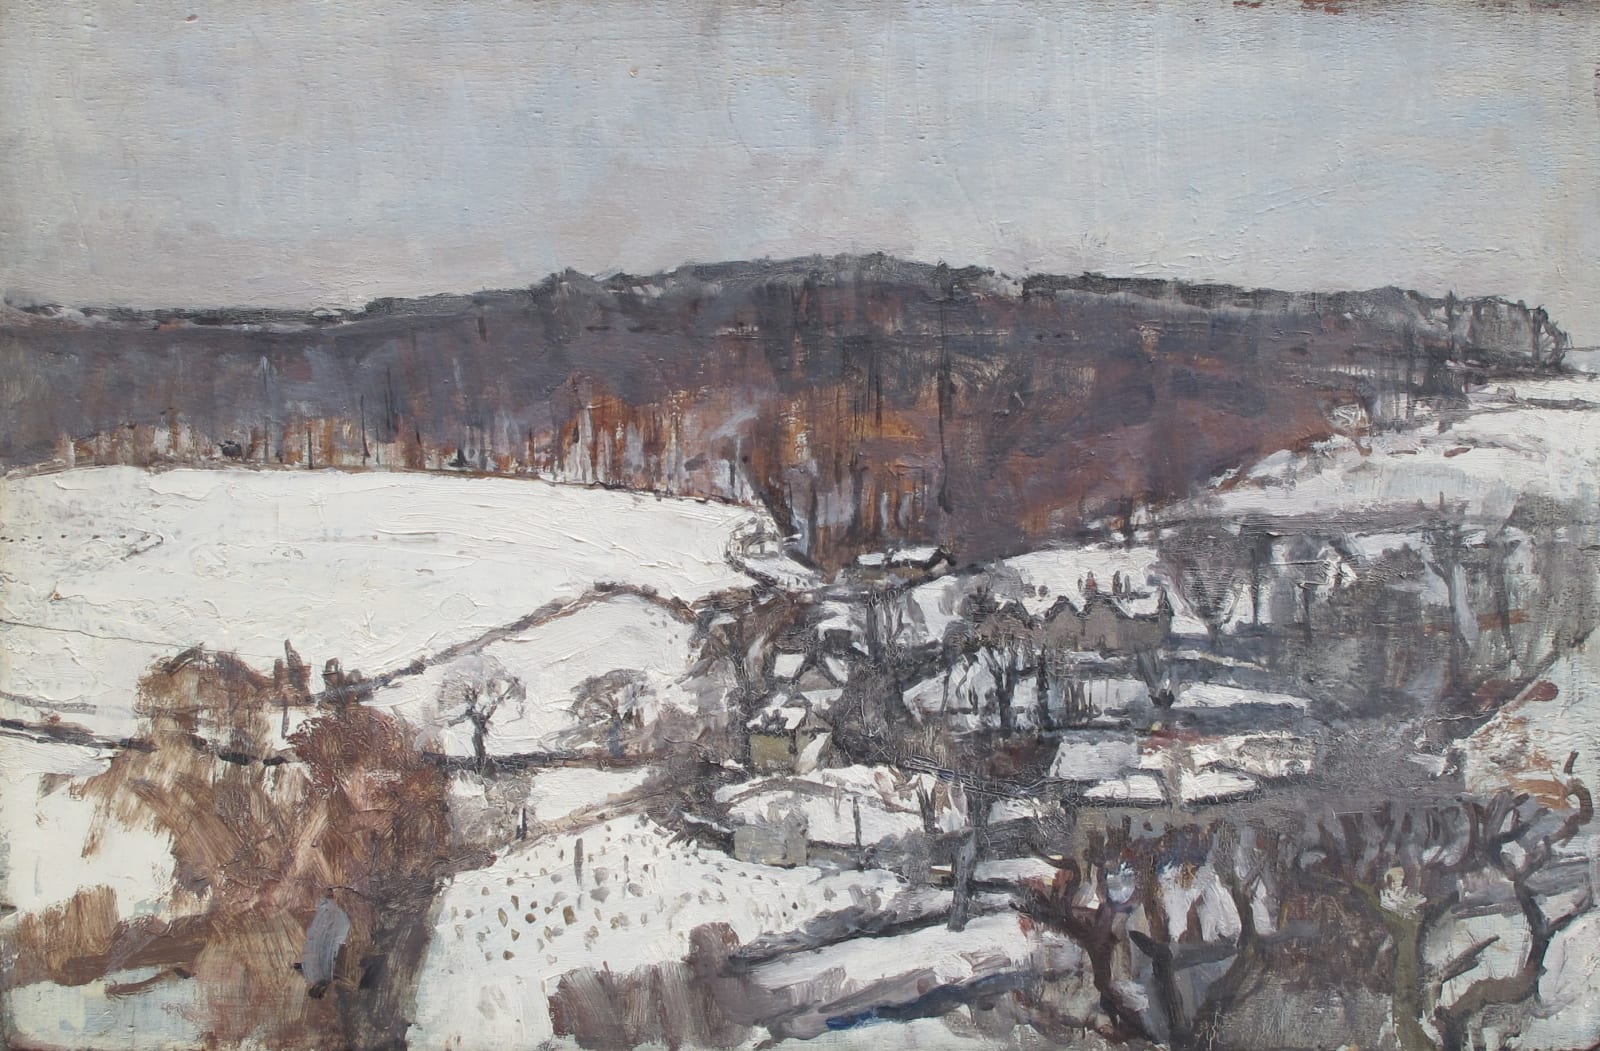 PATRICK GEORGE, Sheepscombe in the Snow, circa 1948